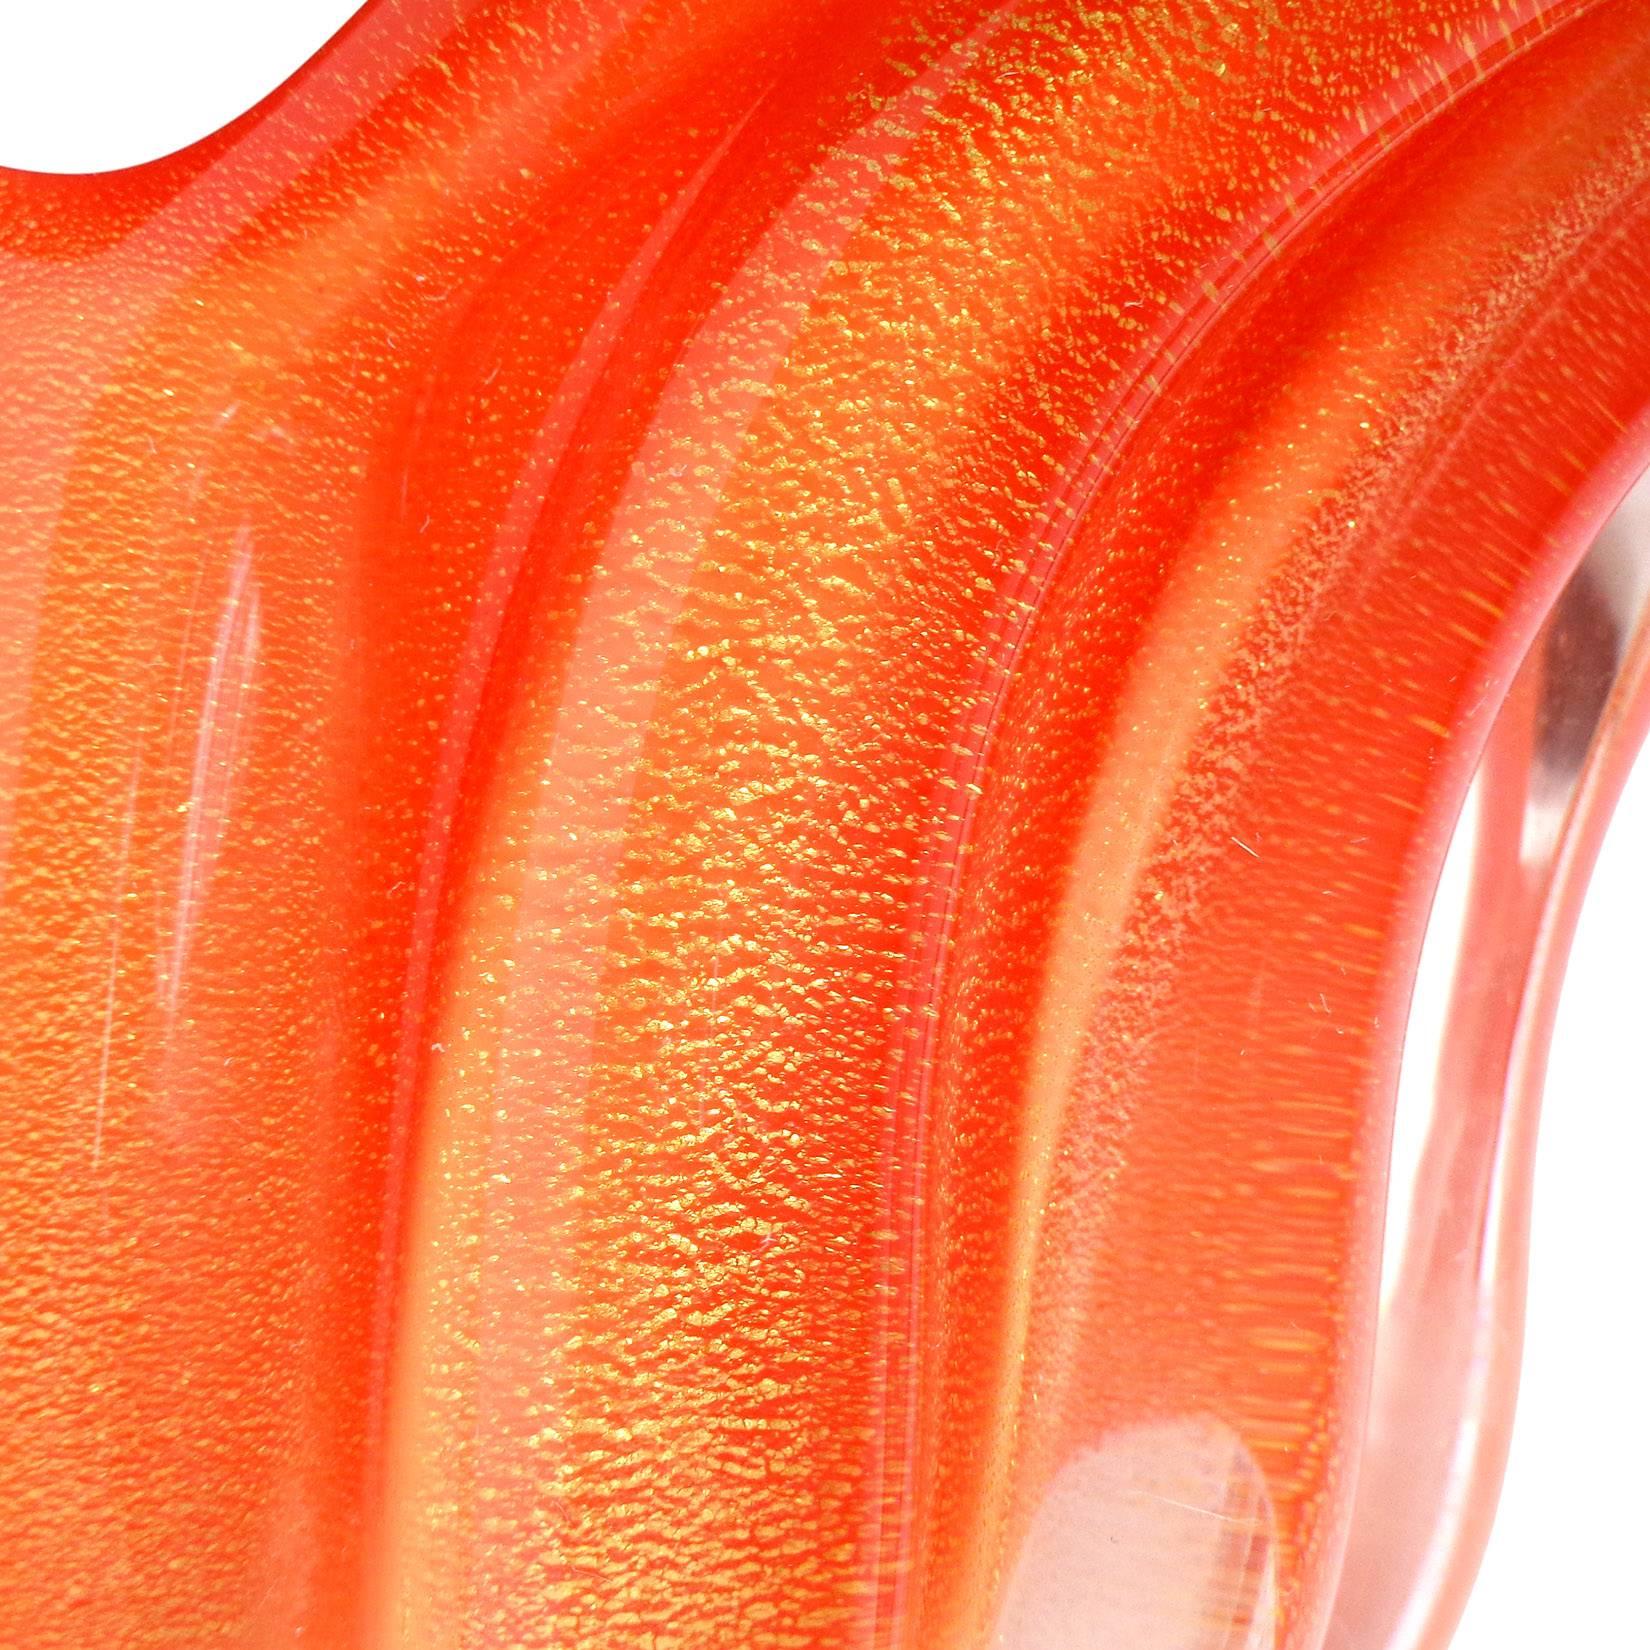 Hand-Crafted Barbini Murano Sommerso and Solid Orange Hues Italian Art Glass Wing Bowls